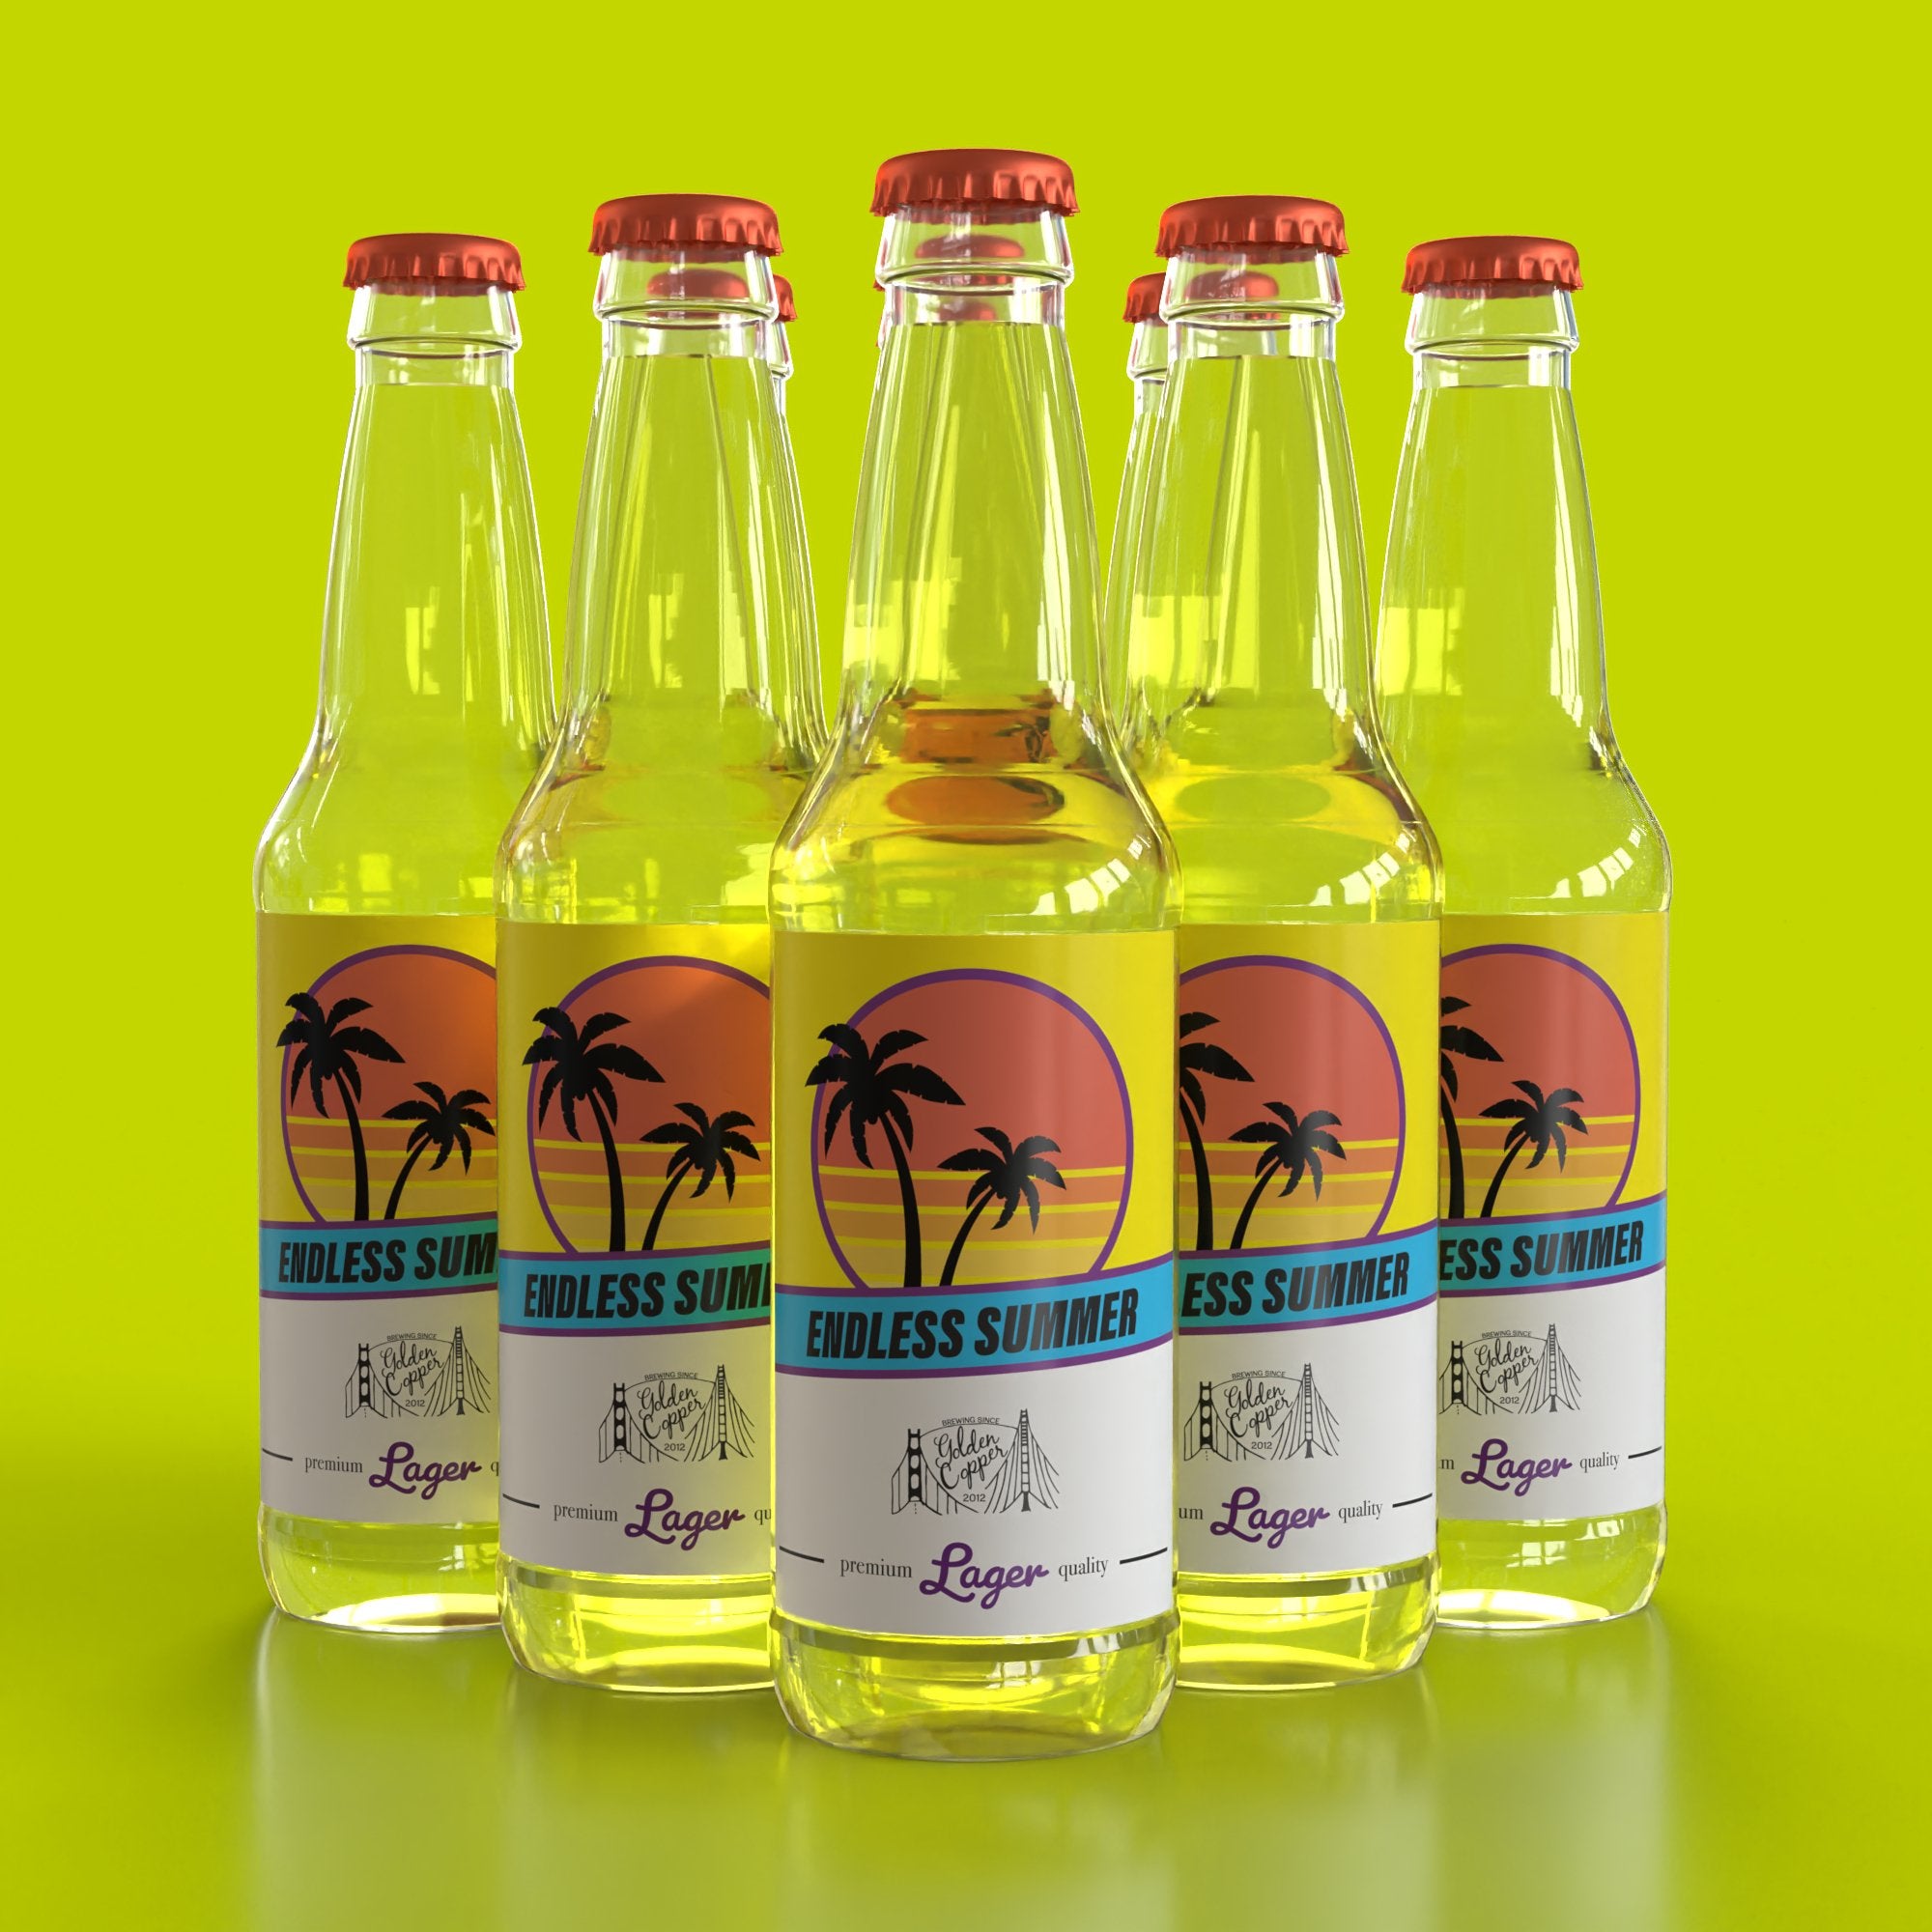  Five clear glass bottles of "Endless Summer" lager lined up diagonally, with red caps and colorful labels featuring palm trees against a sunset, on a bright green background